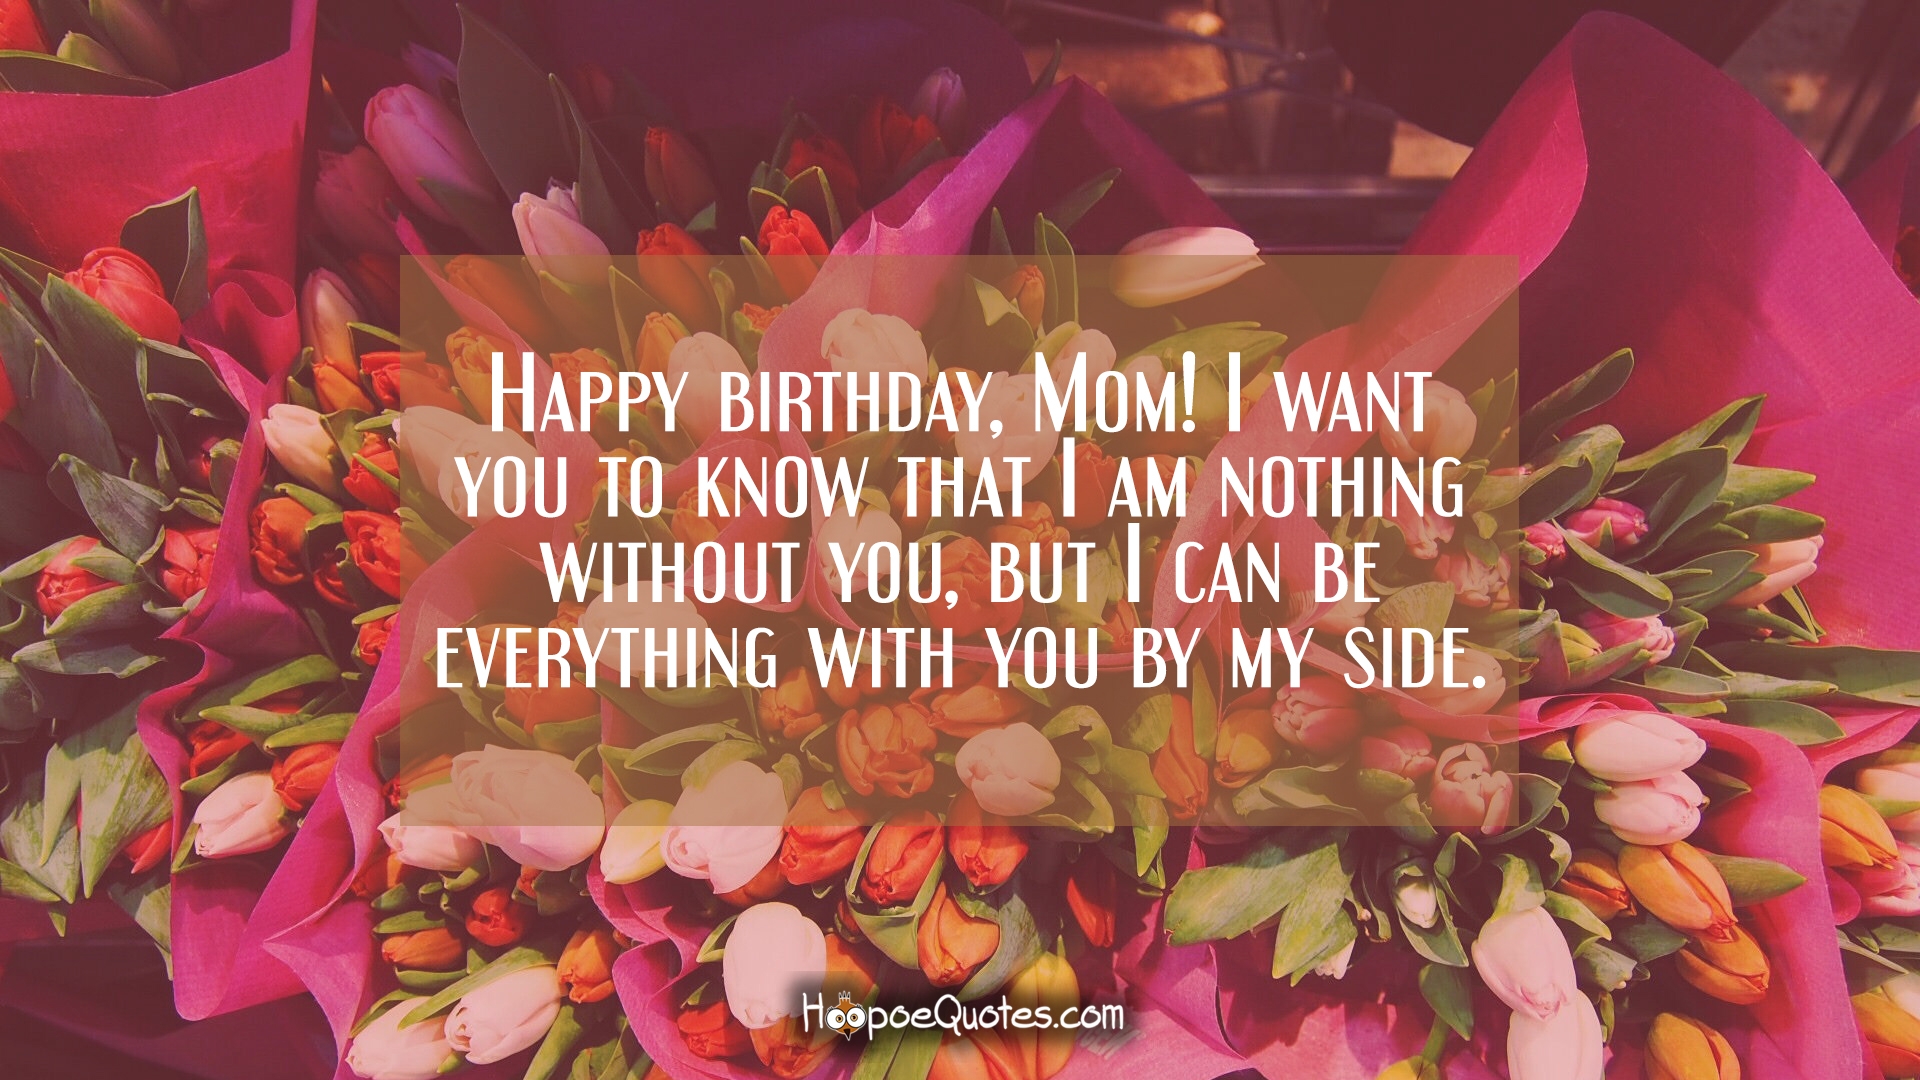 Happy birthday, Mom! I want you to know that I am nothing without you, but I can be everything with you by my side. Love you!